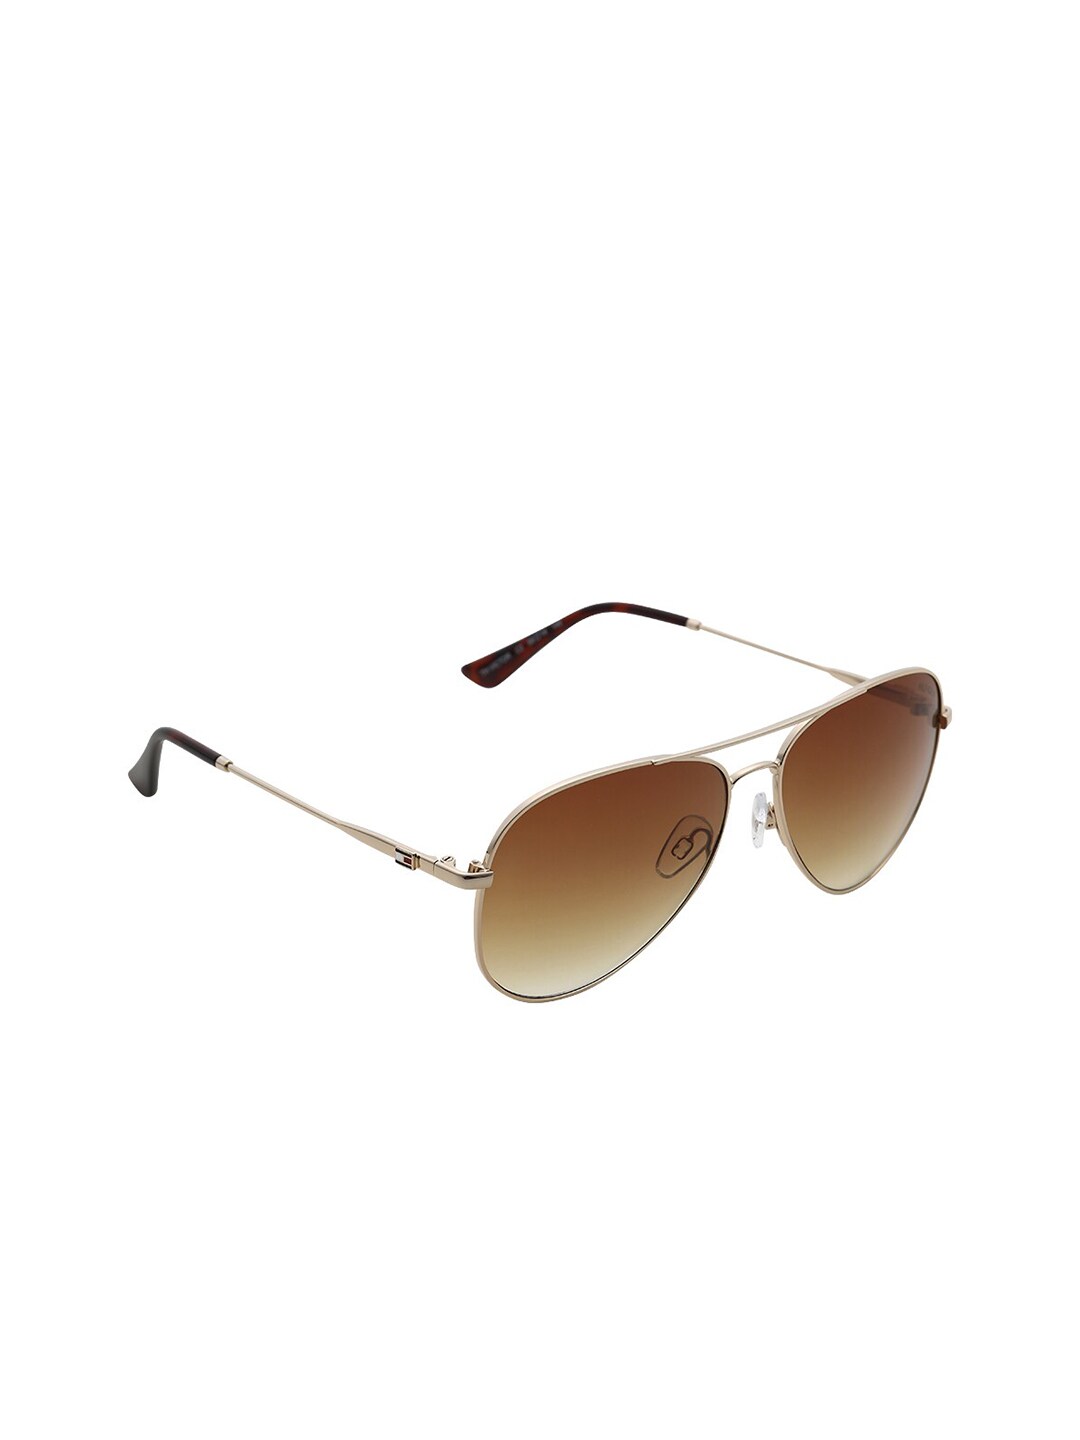 Tommy Hilfiger Unisex Brown Sunglasses Price in India